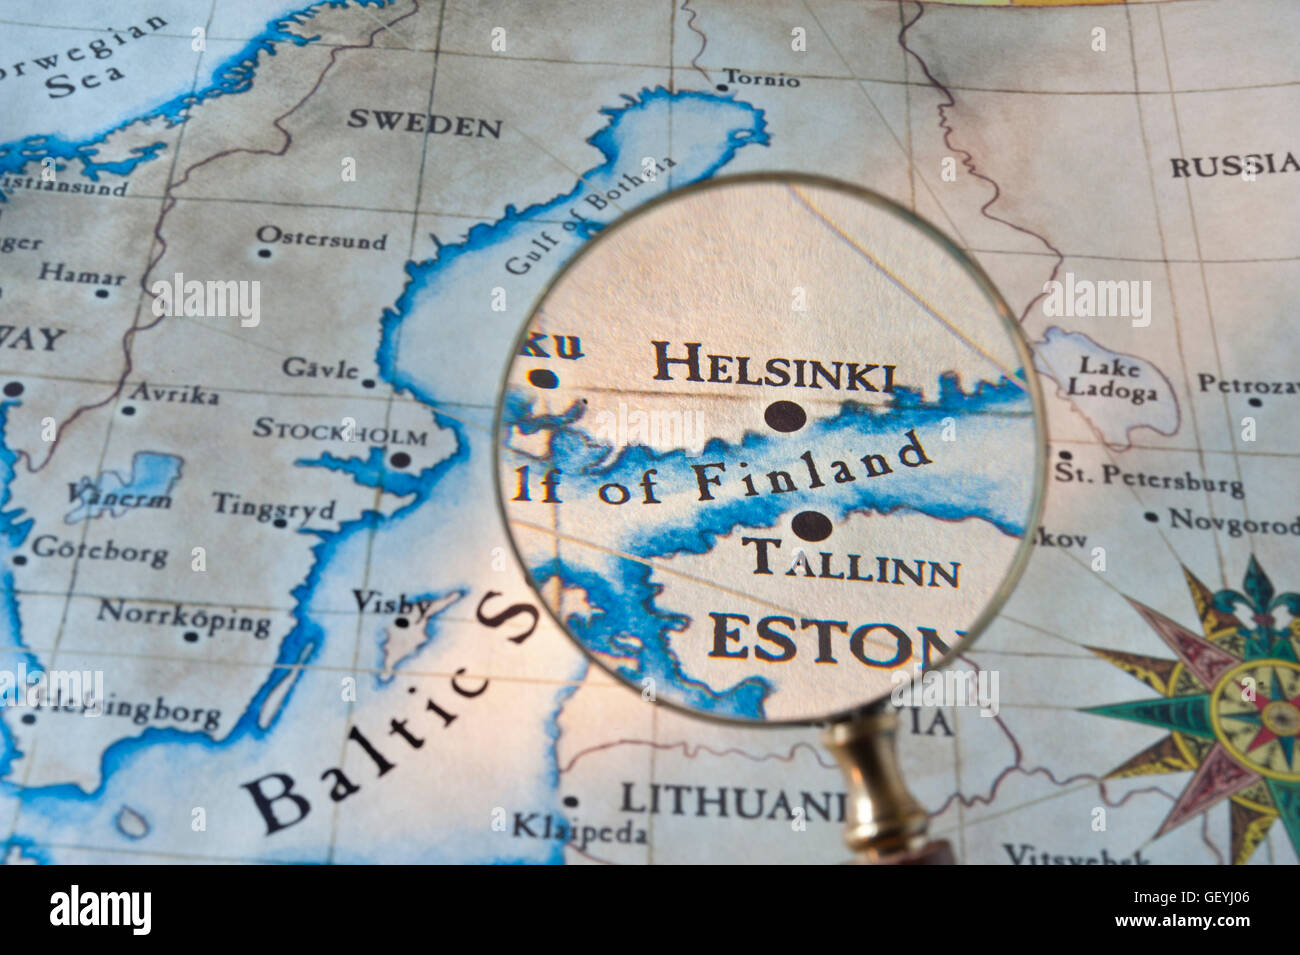 TALLINN Old style map with magnifying glass over Gulf of Finland featuring Helsinki & Tallinn with Baltic Sea Sweden & Eastern Europe Stock Photo